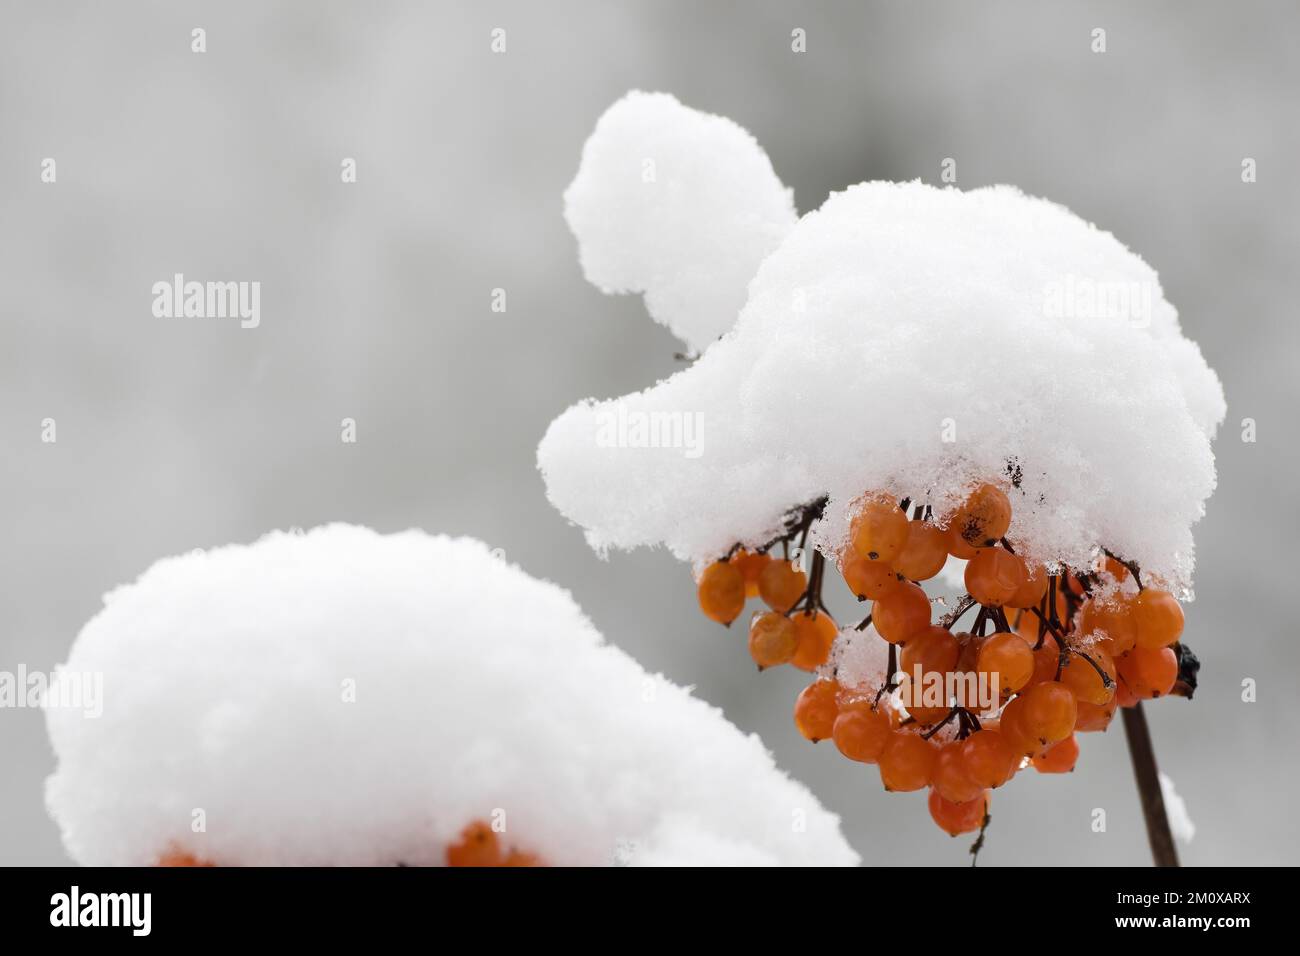 Fruits of the common guelder rose (Viburnum opulus), snow-covered, Hesse, Germany, Europe Stock Photo